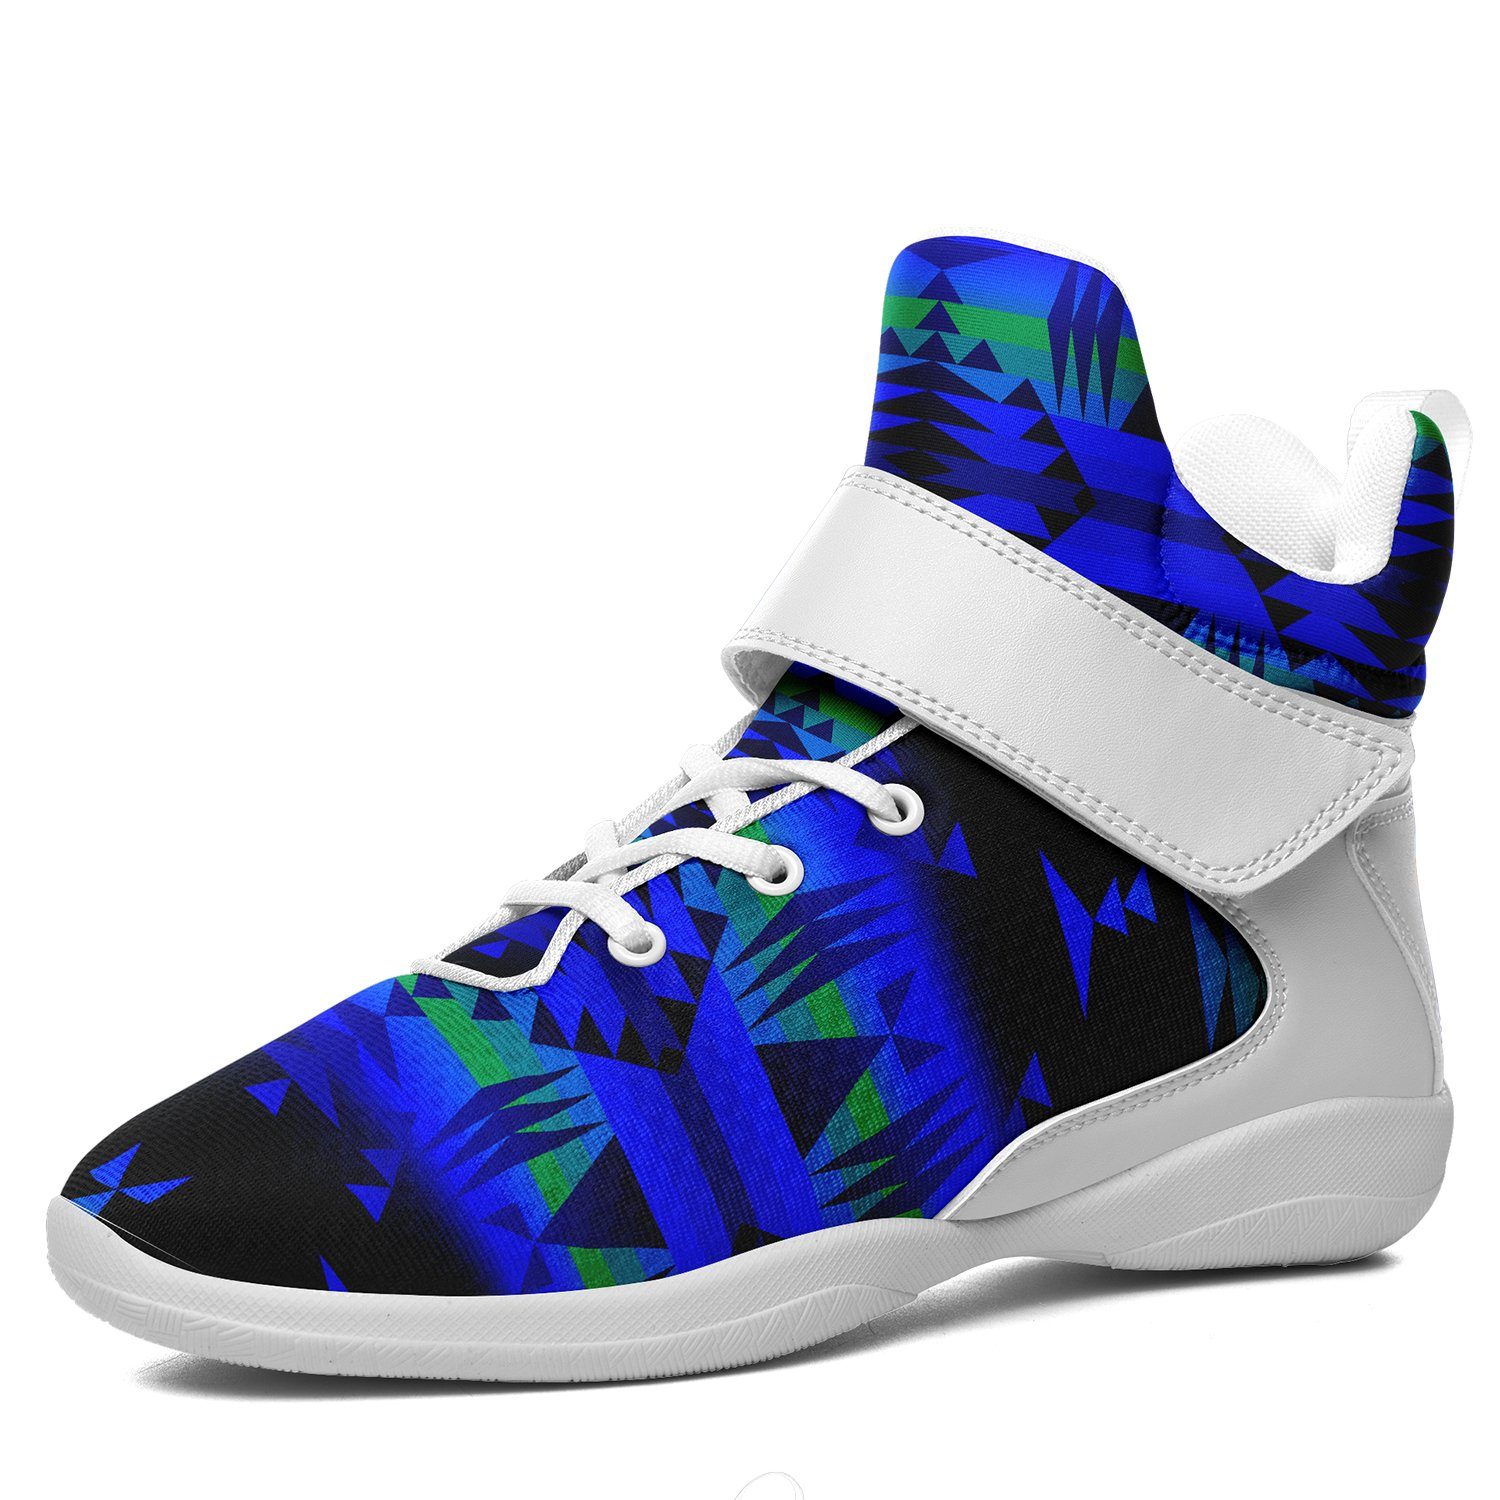 Between the Blue Ridge Mountains Ipottaa Basketball / Sport High Top Shoes - White Sole 49 Dzine US Men 7 / EUR 40 White Sole with White Strap 